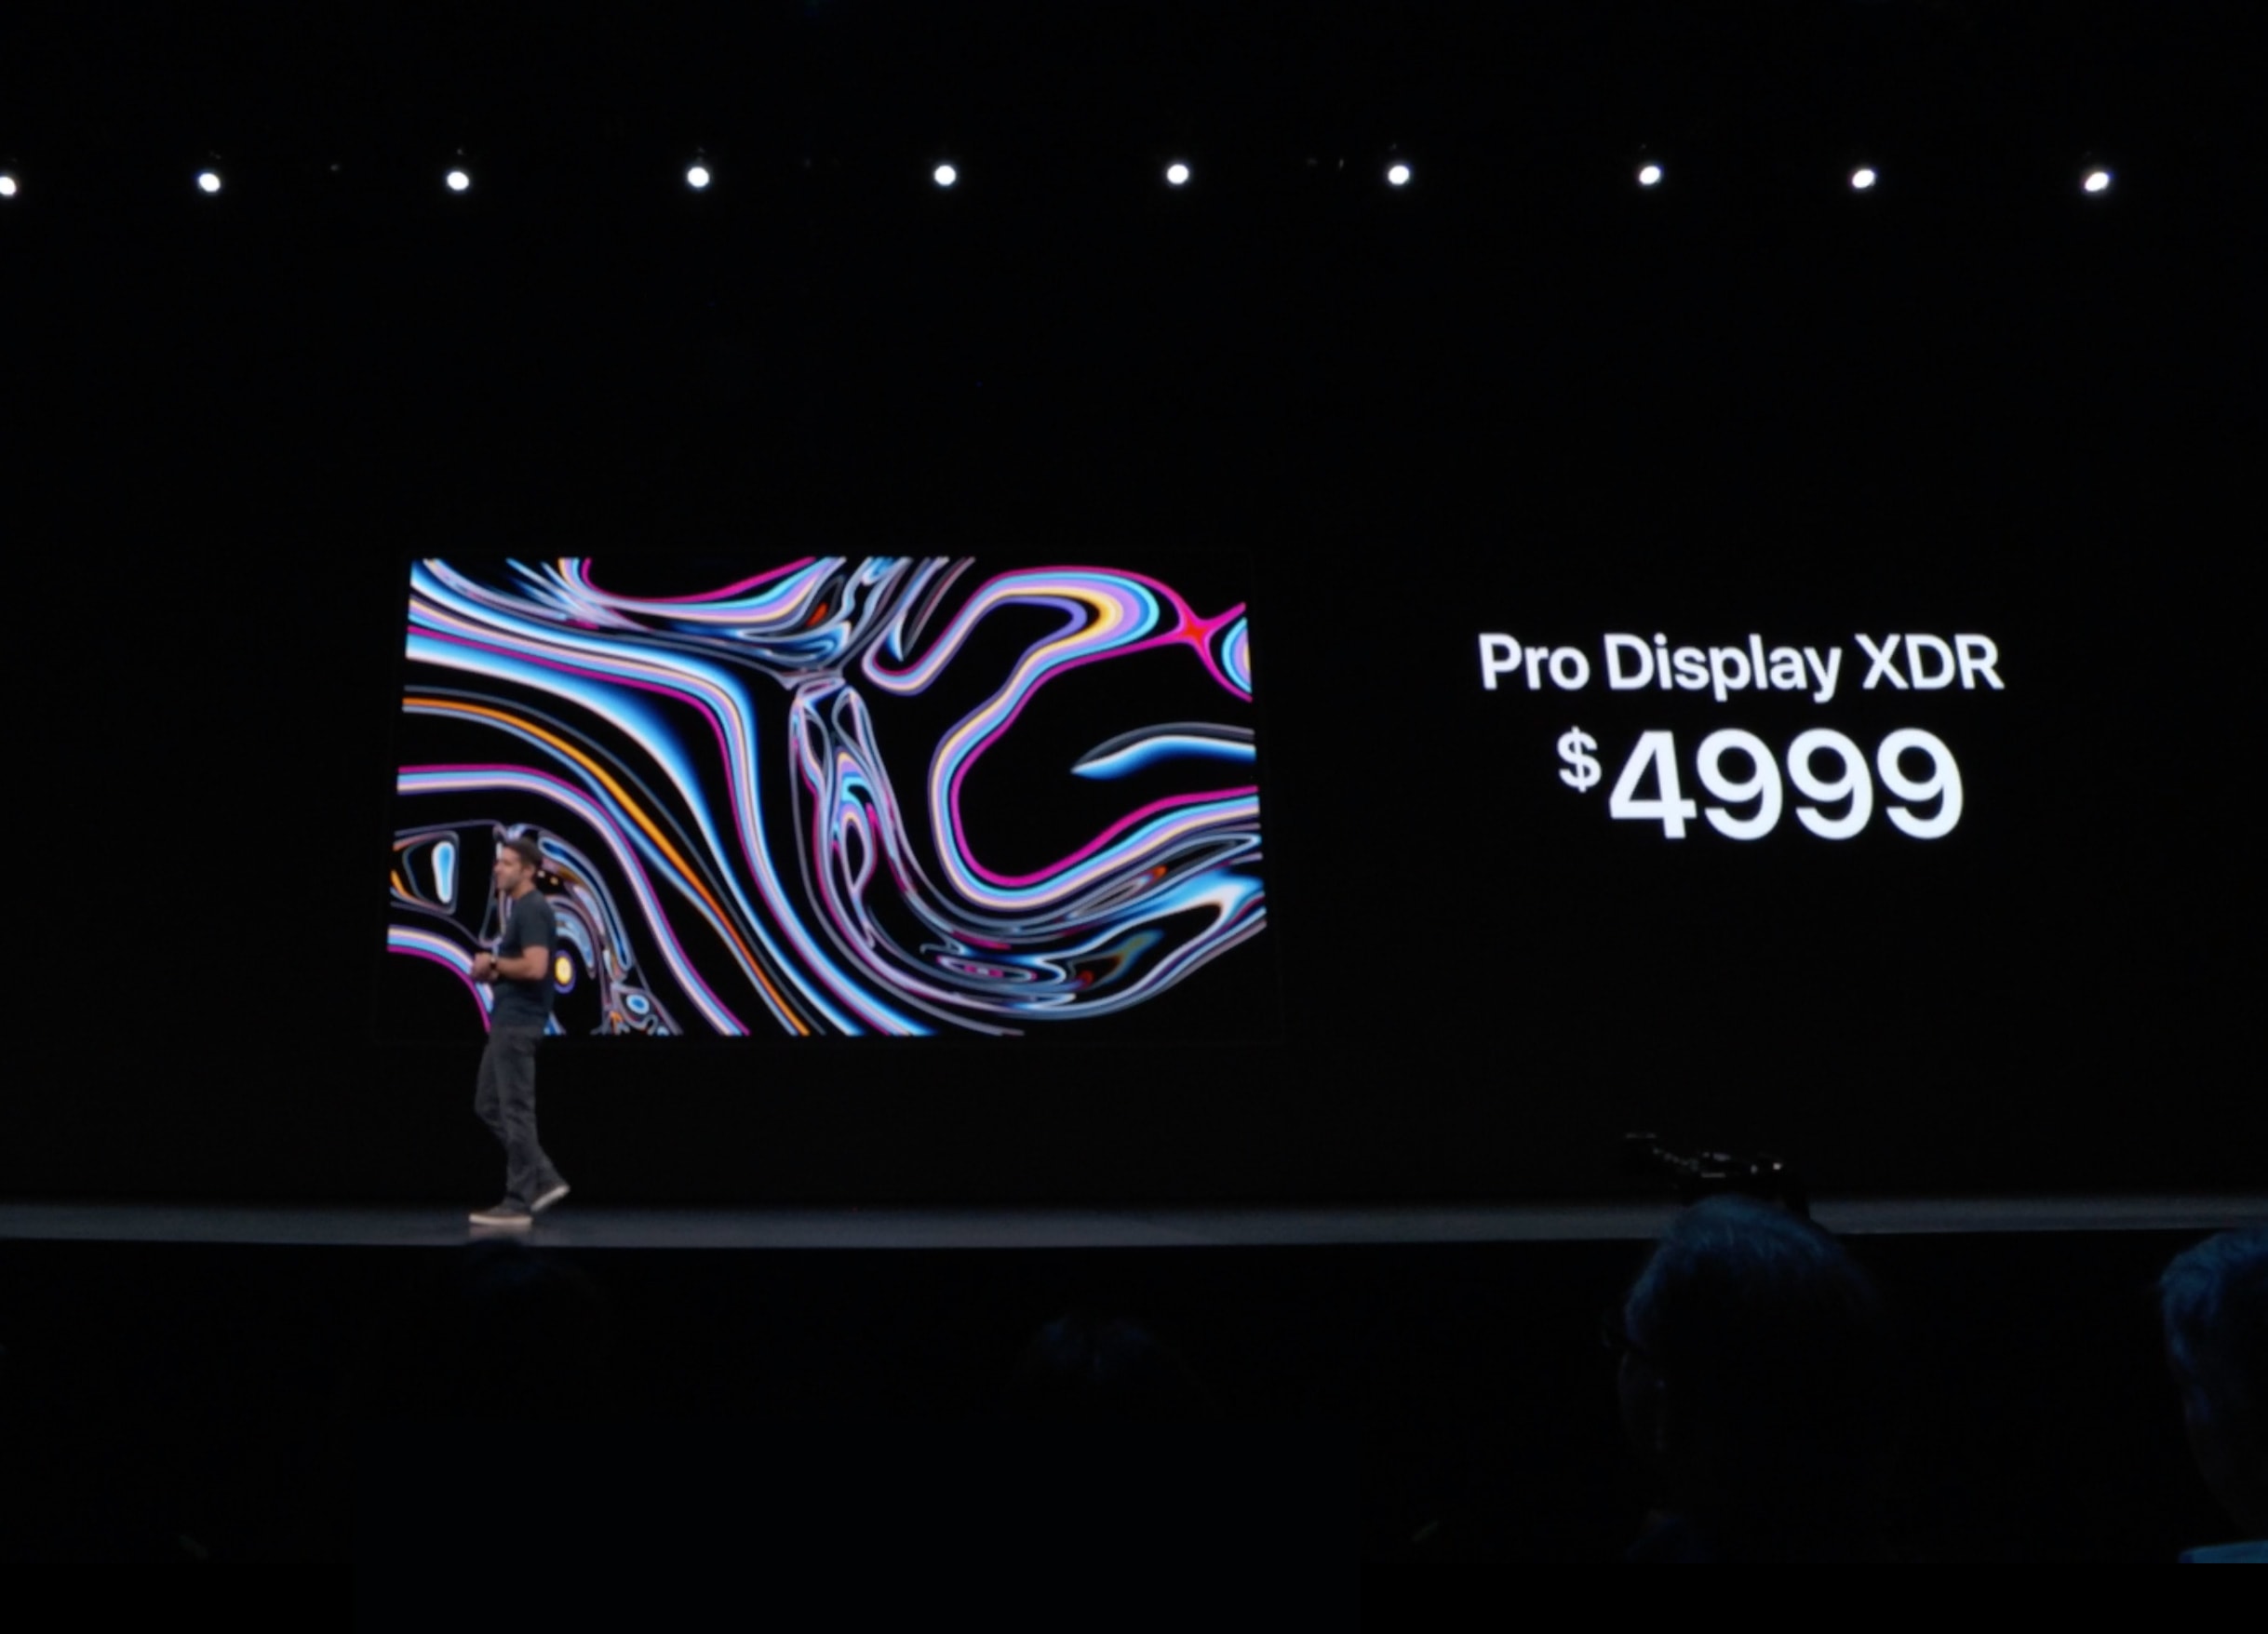 At least the Pro Display XDR didn't cost $43,000